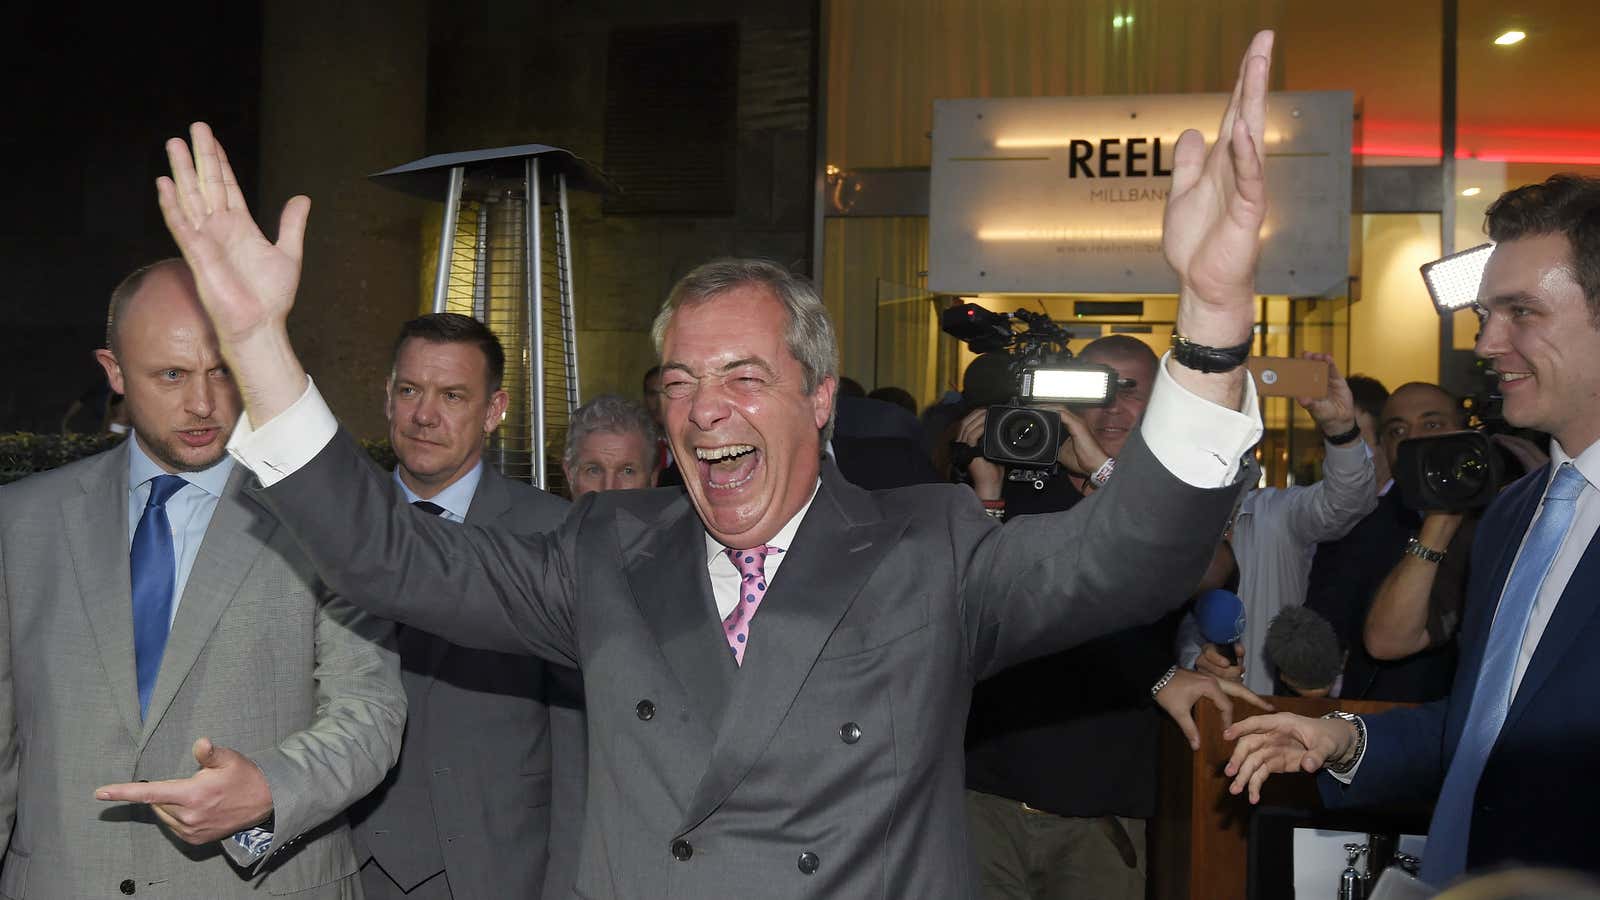 Brexit is a long-held dream for Nigel Farage, leader of the UK Independence Party.